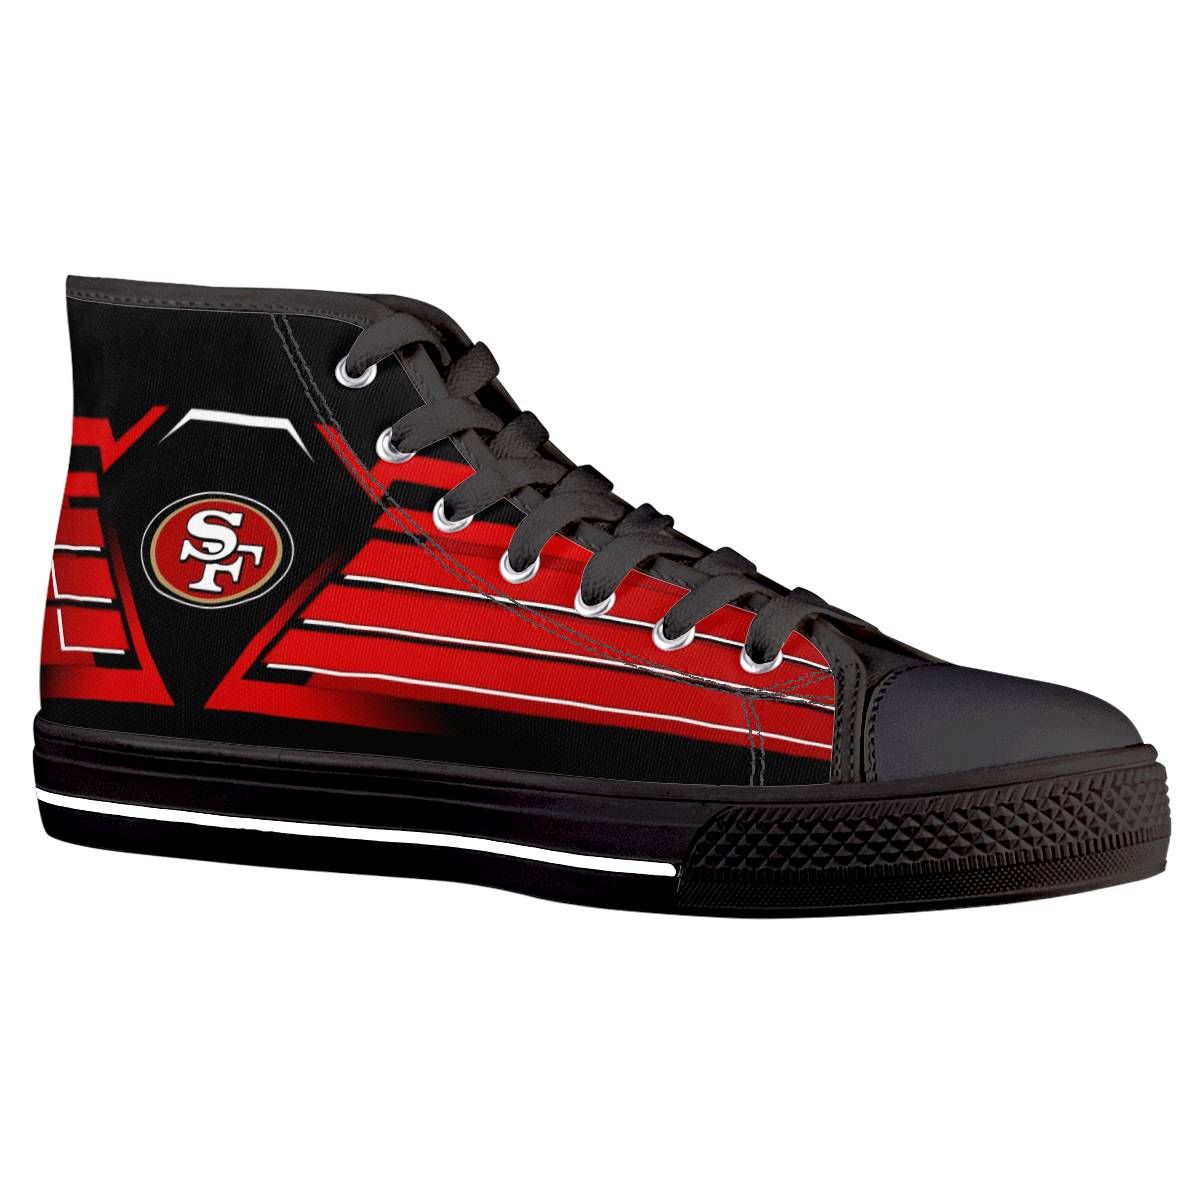 Women's San Francisco 49ers High Top Canvas Sneakers 007